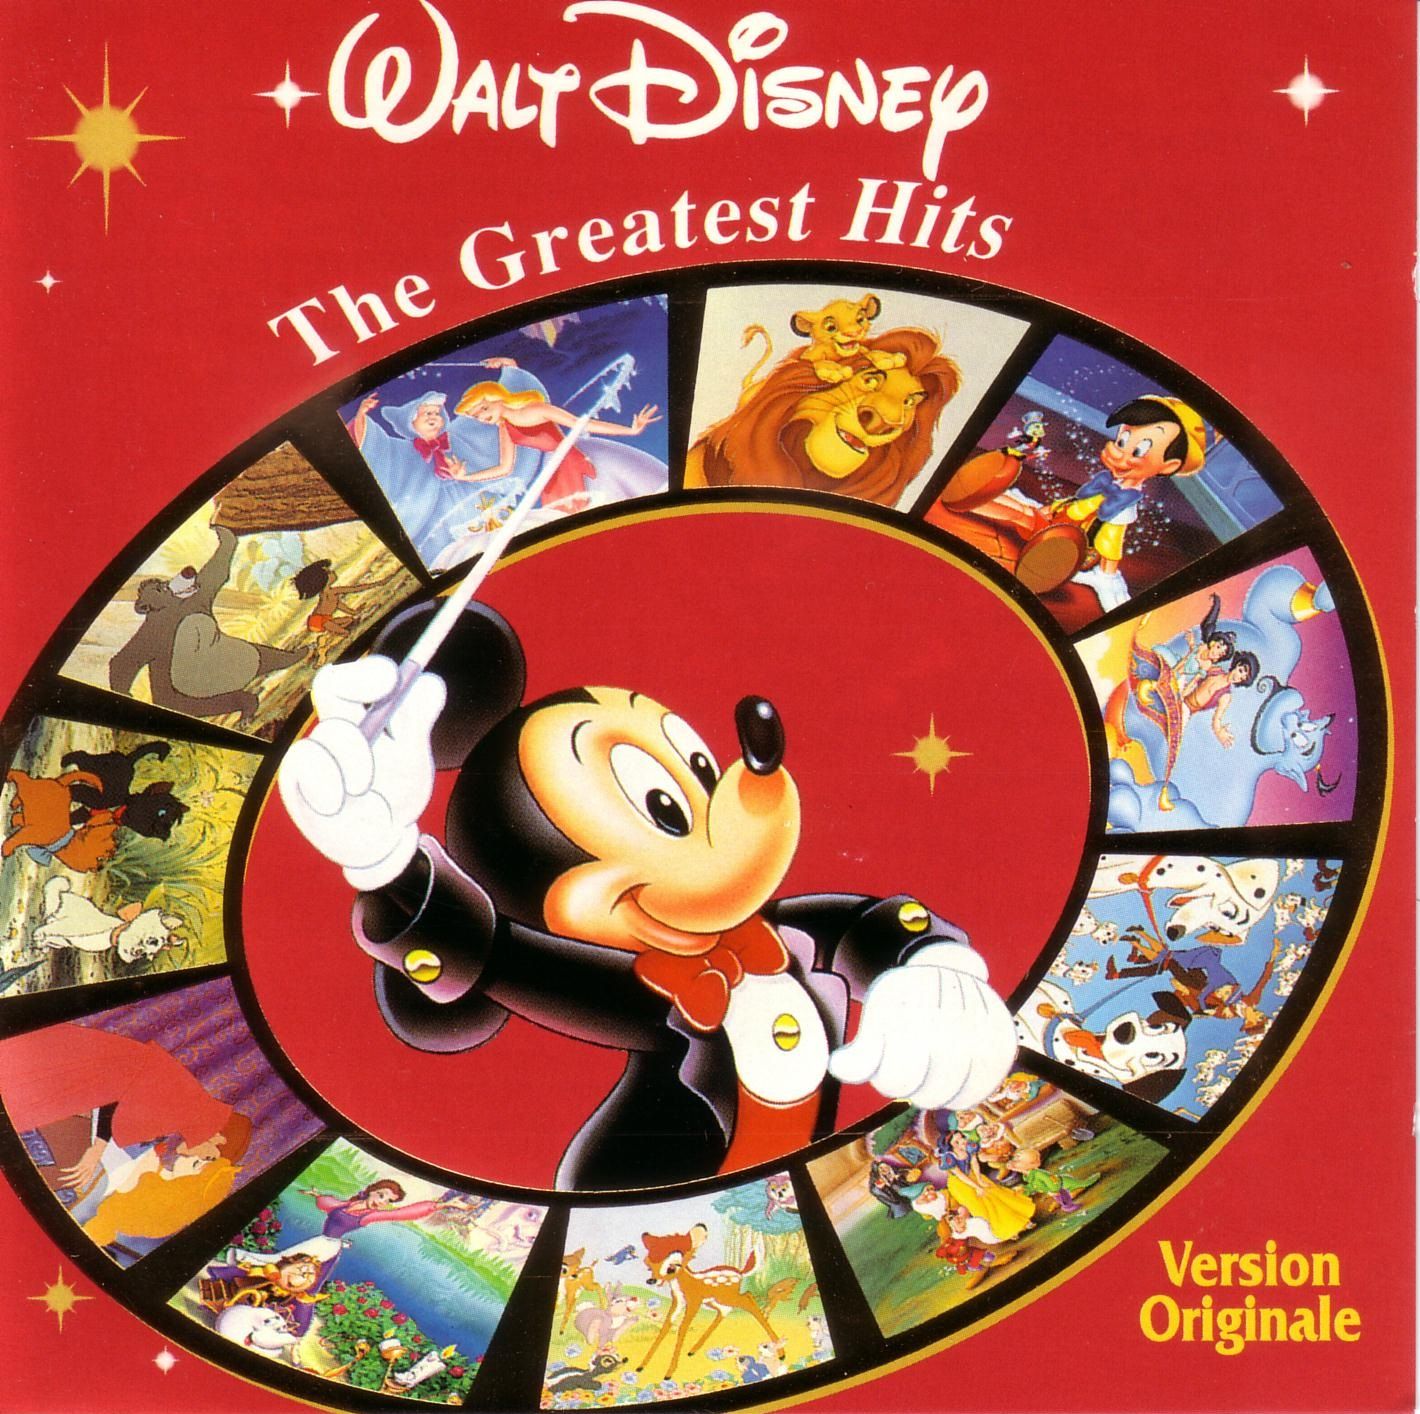 Walt Disney The Gre Disney Cd Covers Cover Century Over 500 000 Album Art Covers For Free